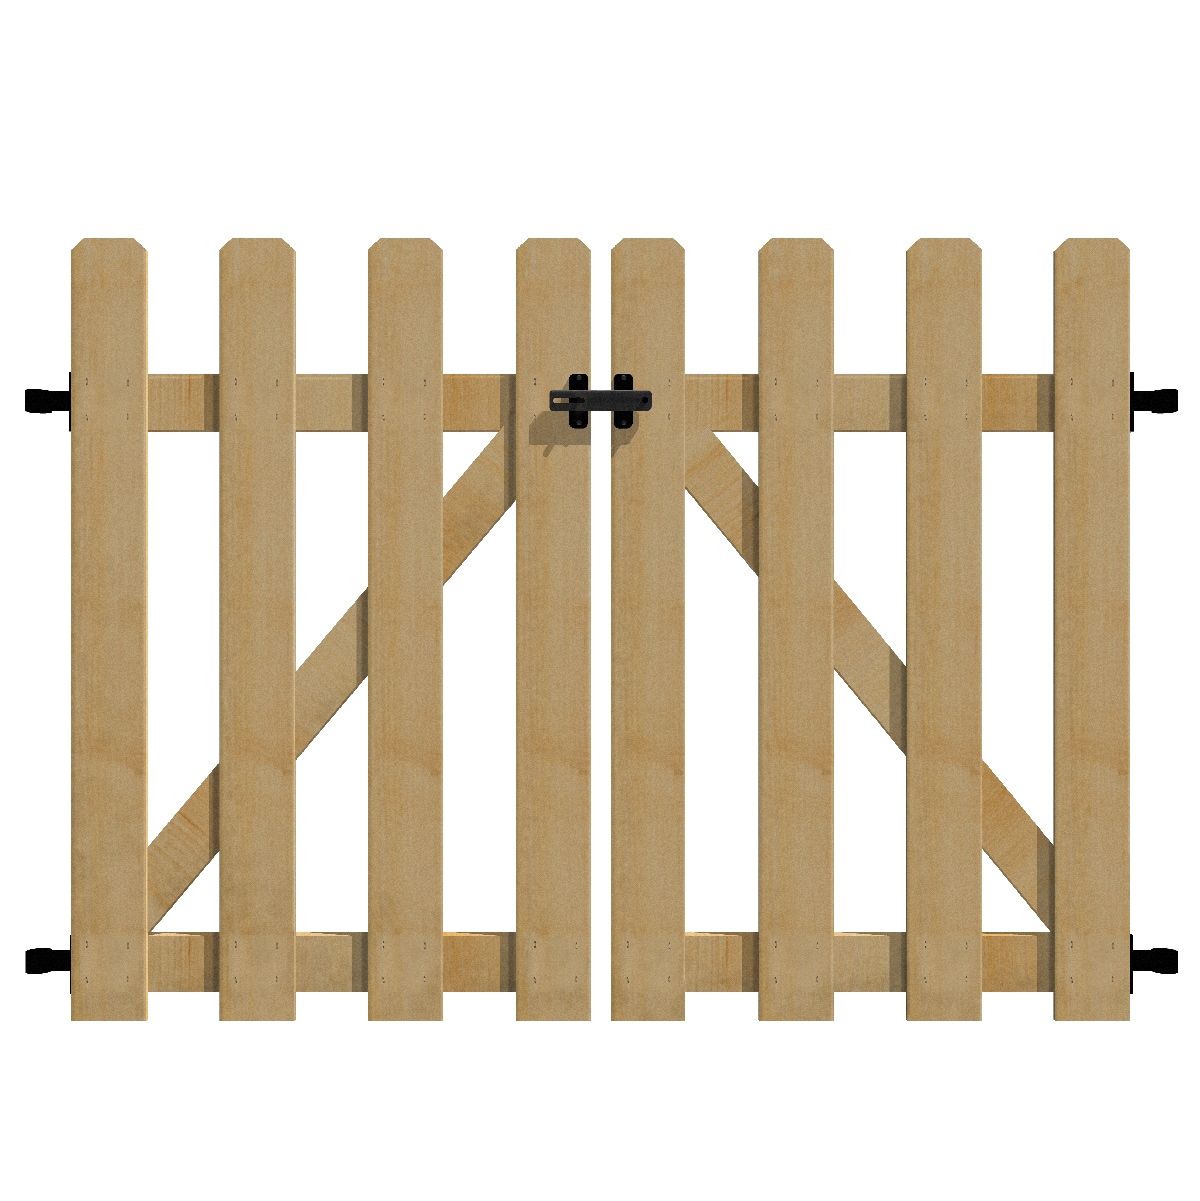 YARDLINK 2.83-ft x 3.6-ft Brown Dog Ear Wood Fence Gate in the